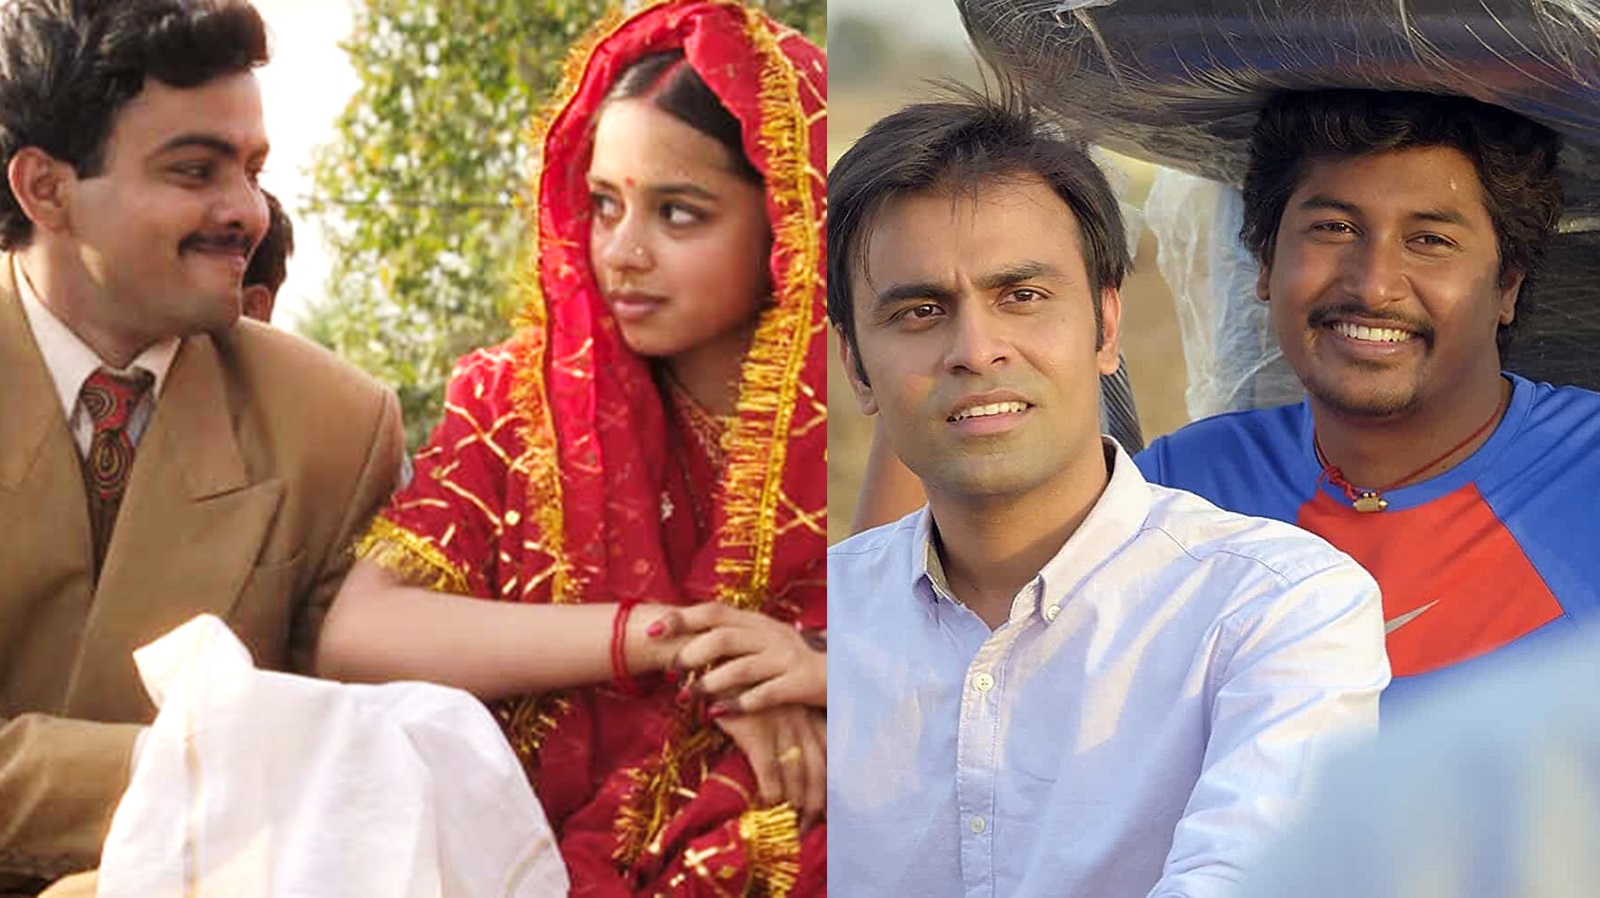 5 Movies & Shows That Made Audiences Fall In Love With The Beauty Of Indian Villages